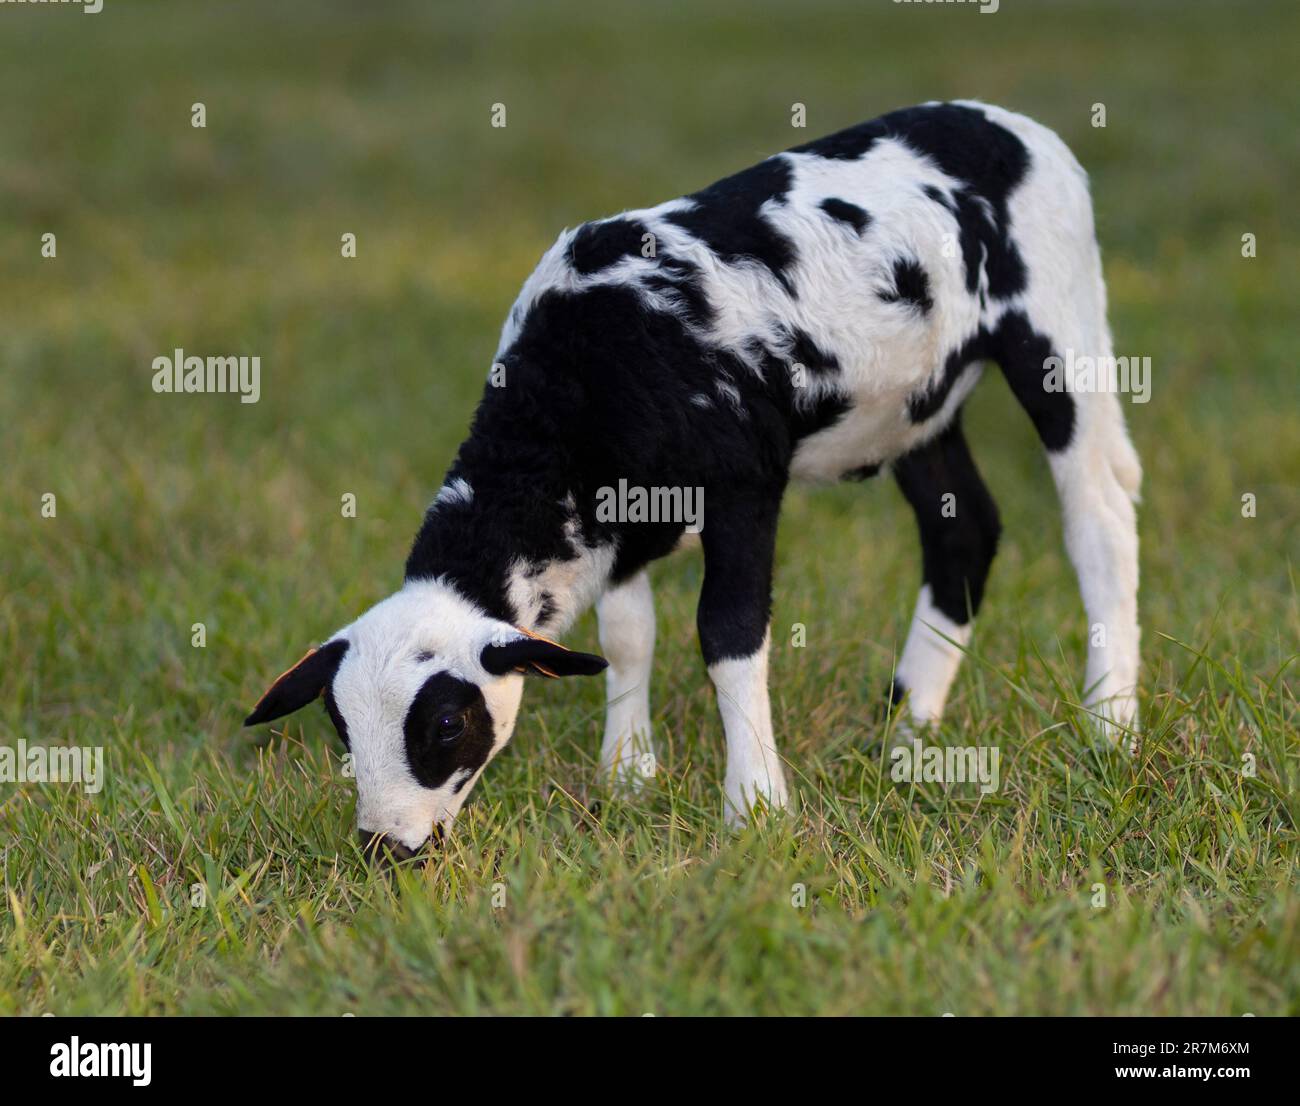 Black and white spotted sheep lamb eating grass on a green summer pasture Stock Photo